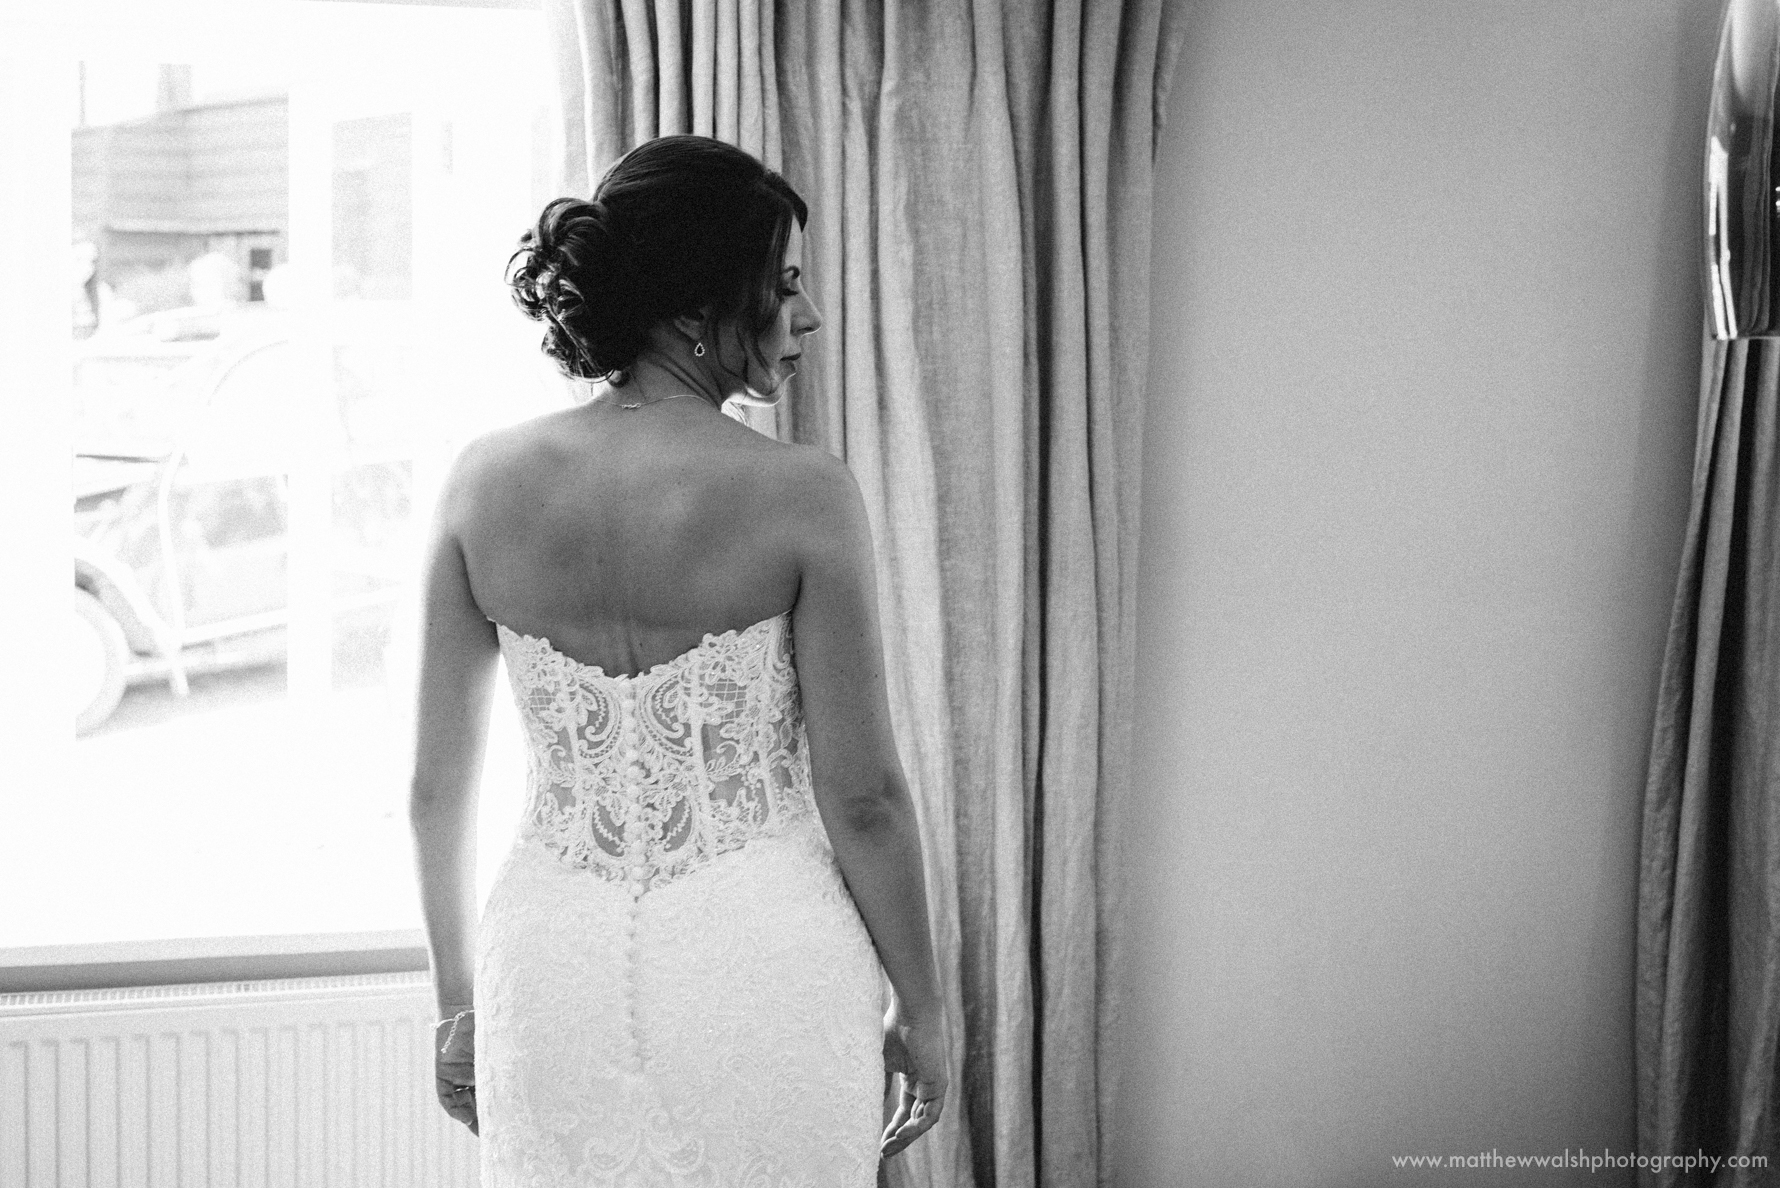 The bride looking beautiful and sophisticated all ready to go